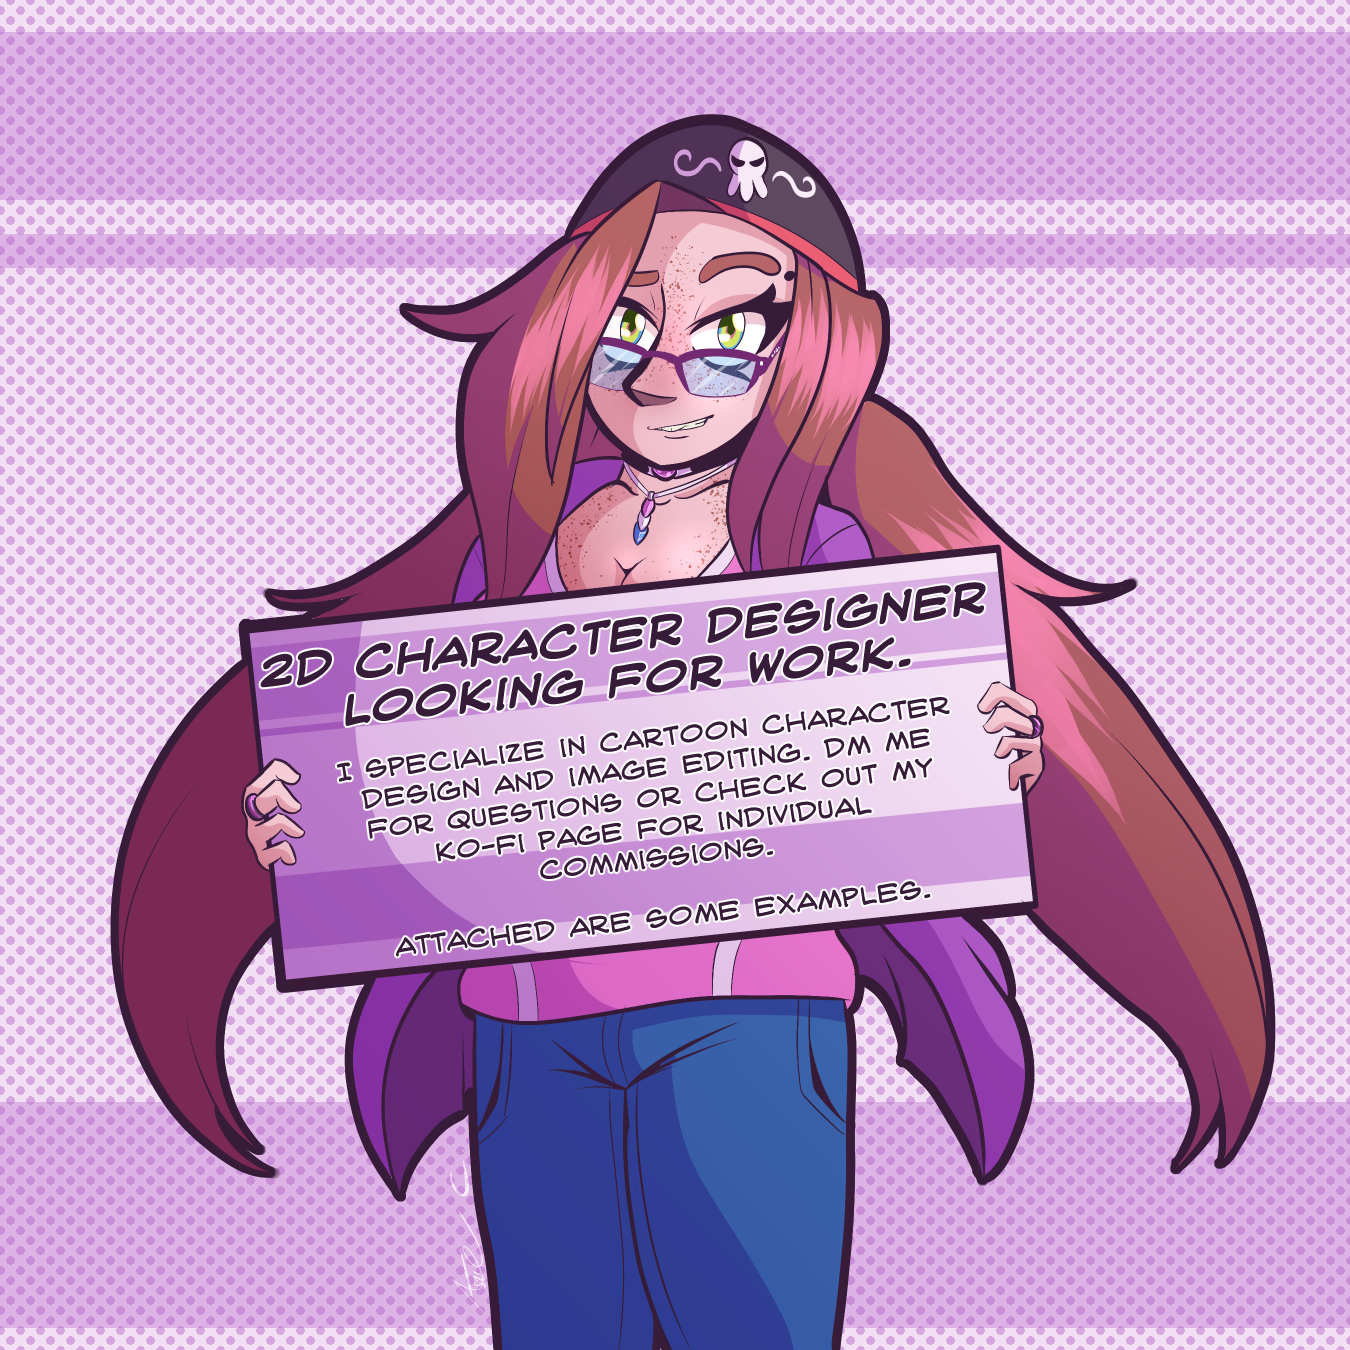 Ashe Holding up a sign that reads "2D Character Designer Looking for work. I specialize in cartoon character design and image editing. DM me for questions or check out my Ko-fi page for individual commissions. Attached are some examples."